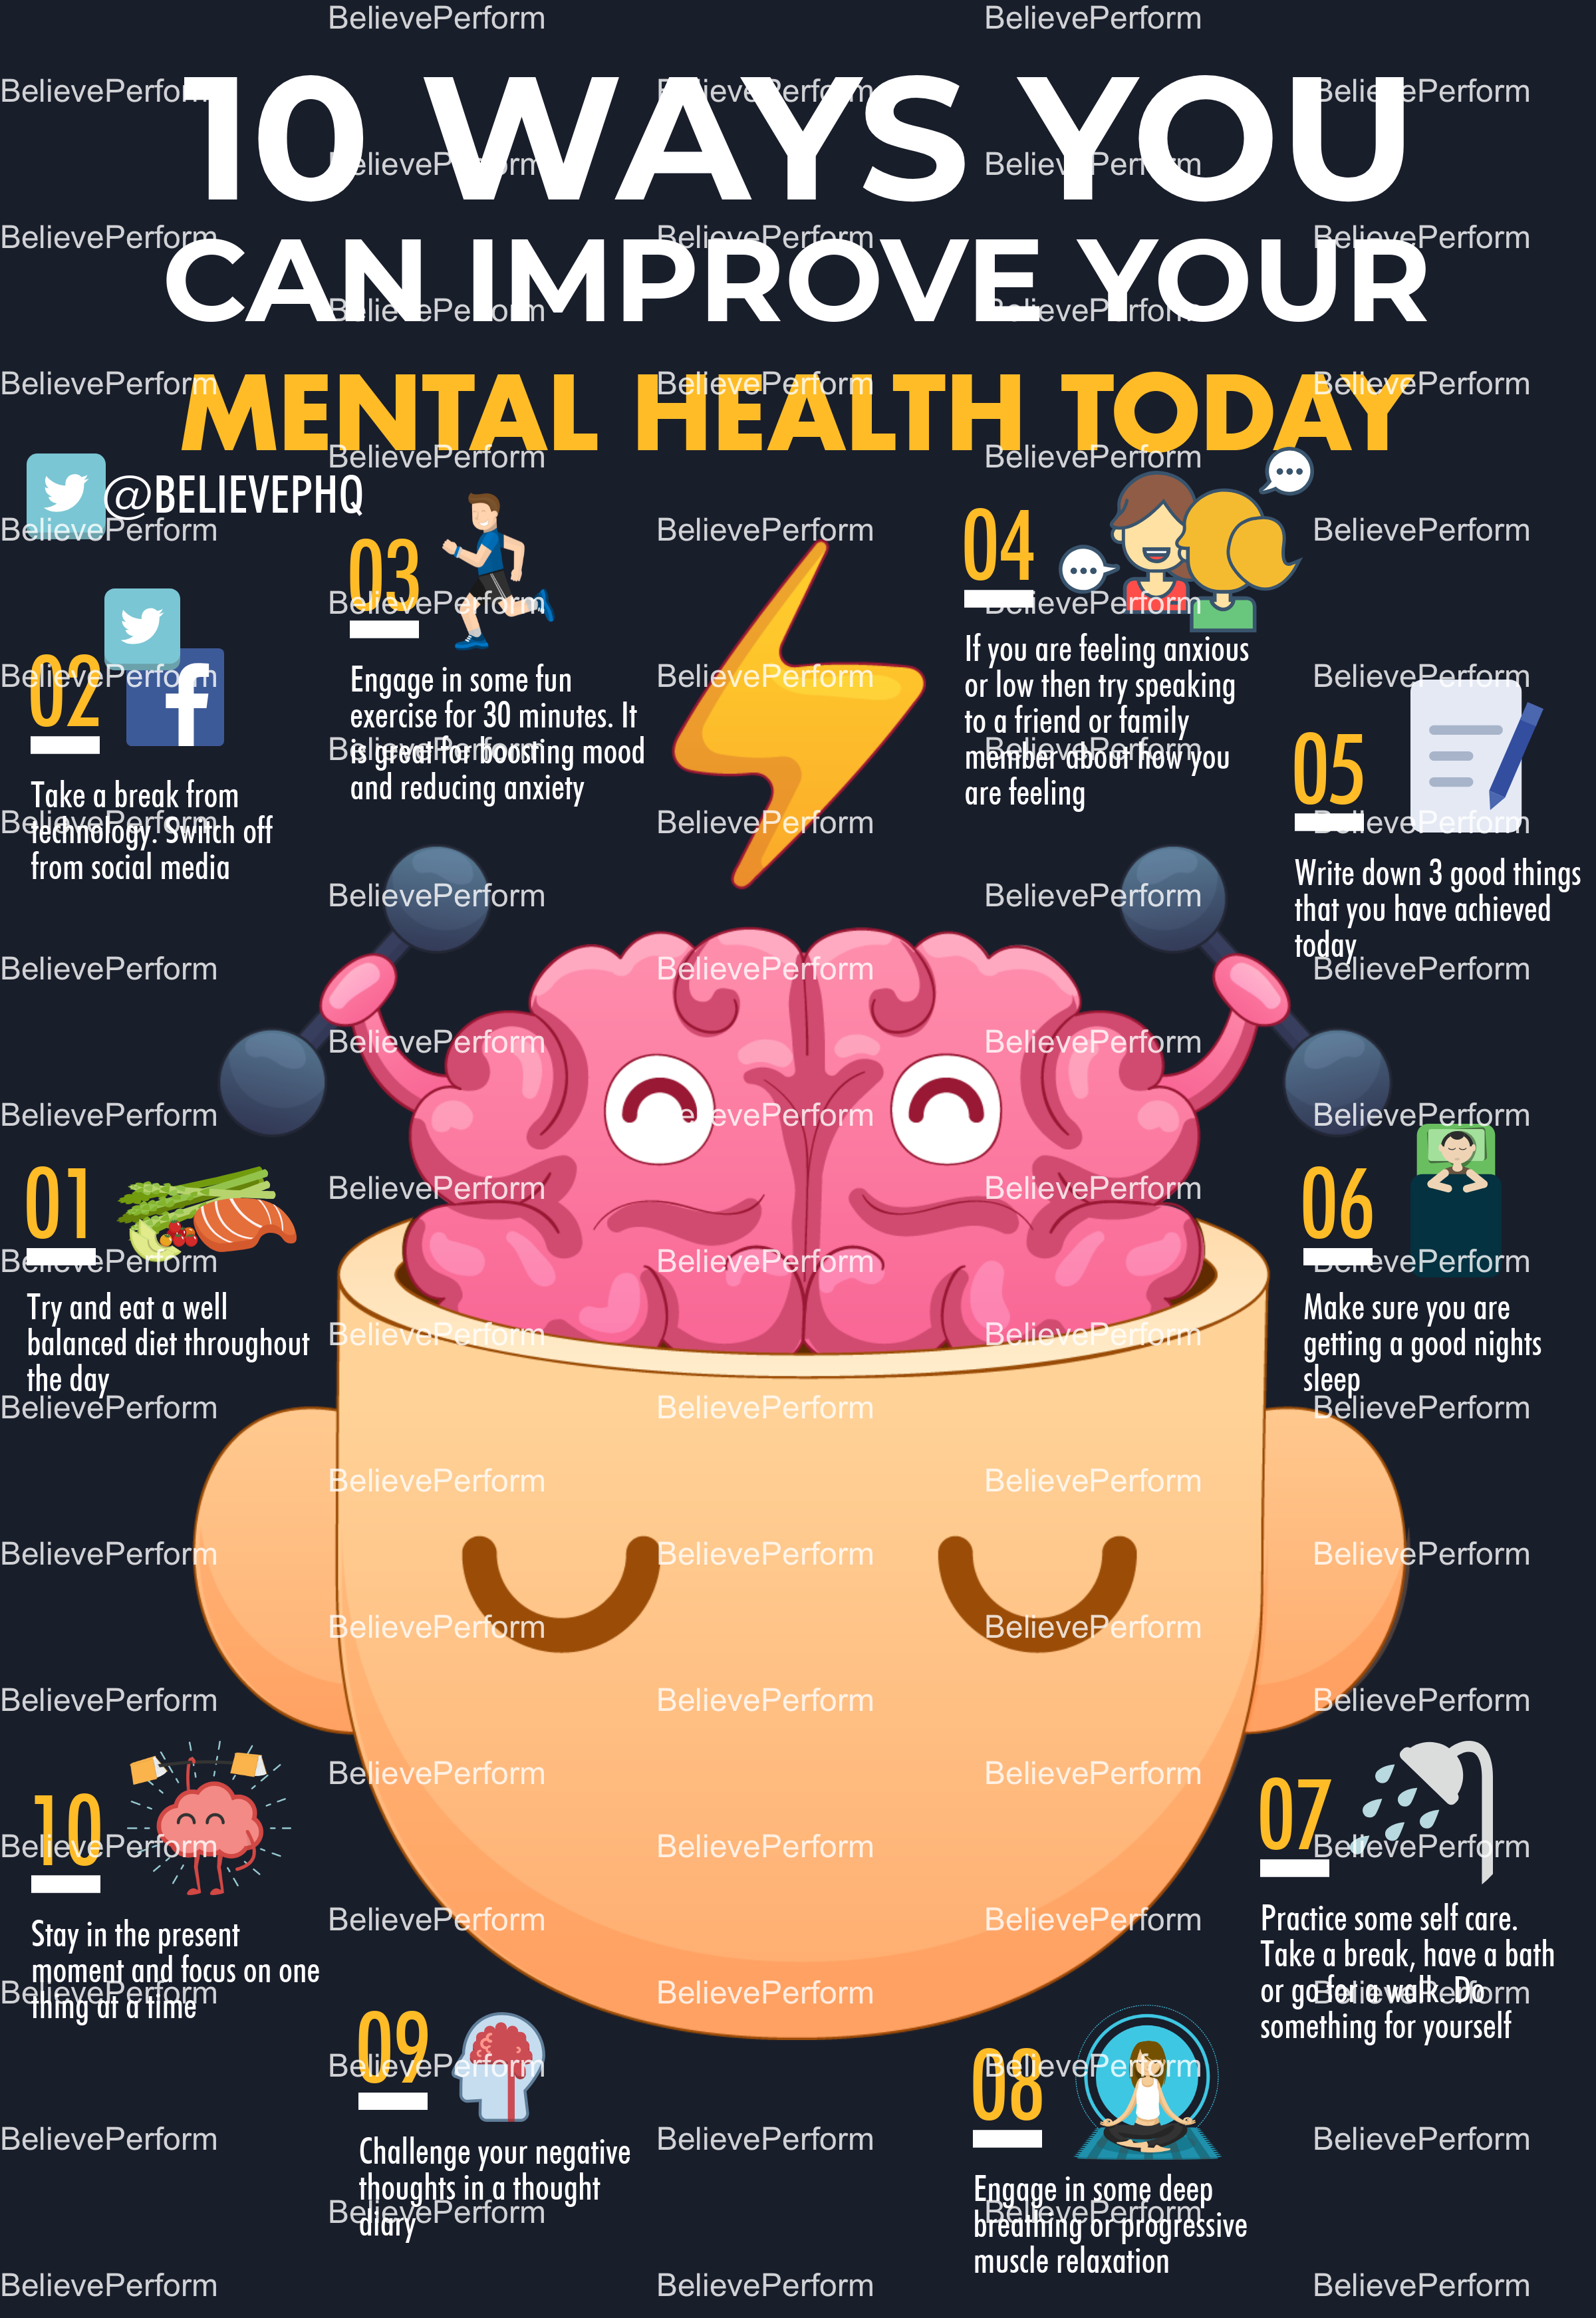 How to Improve Your Mental Health?